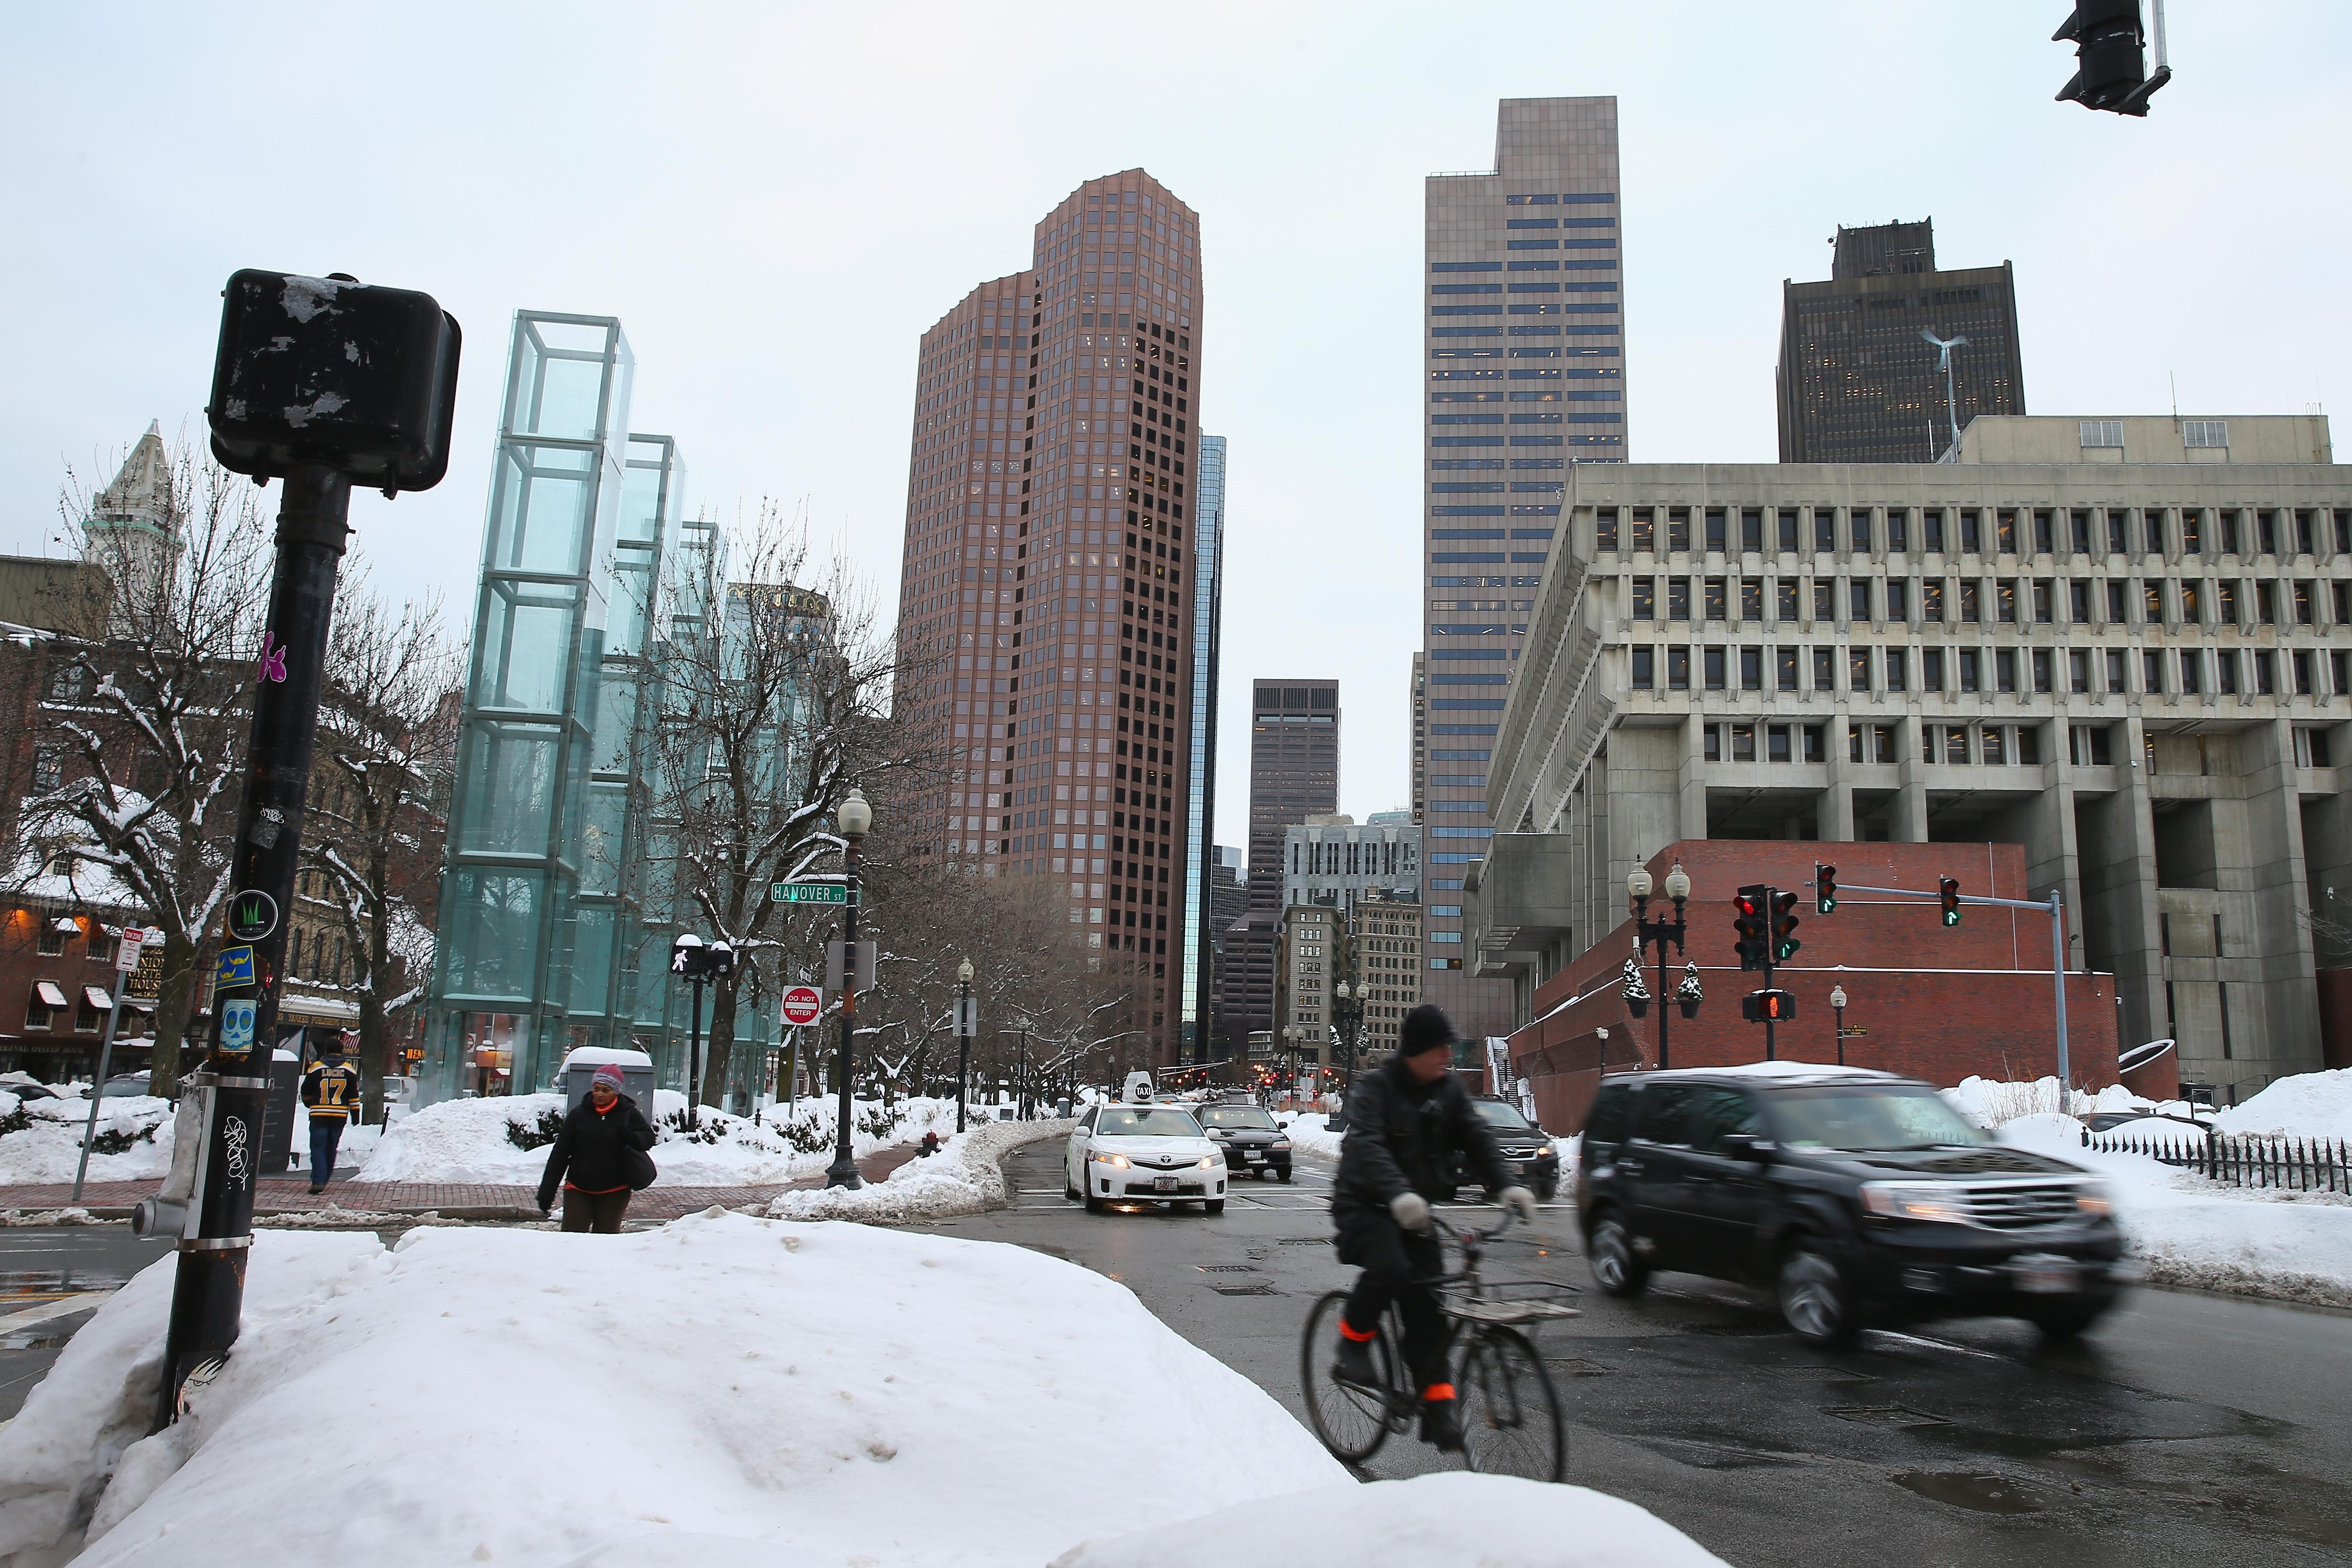 Cars and a biker at a snowy intersection in Boston.